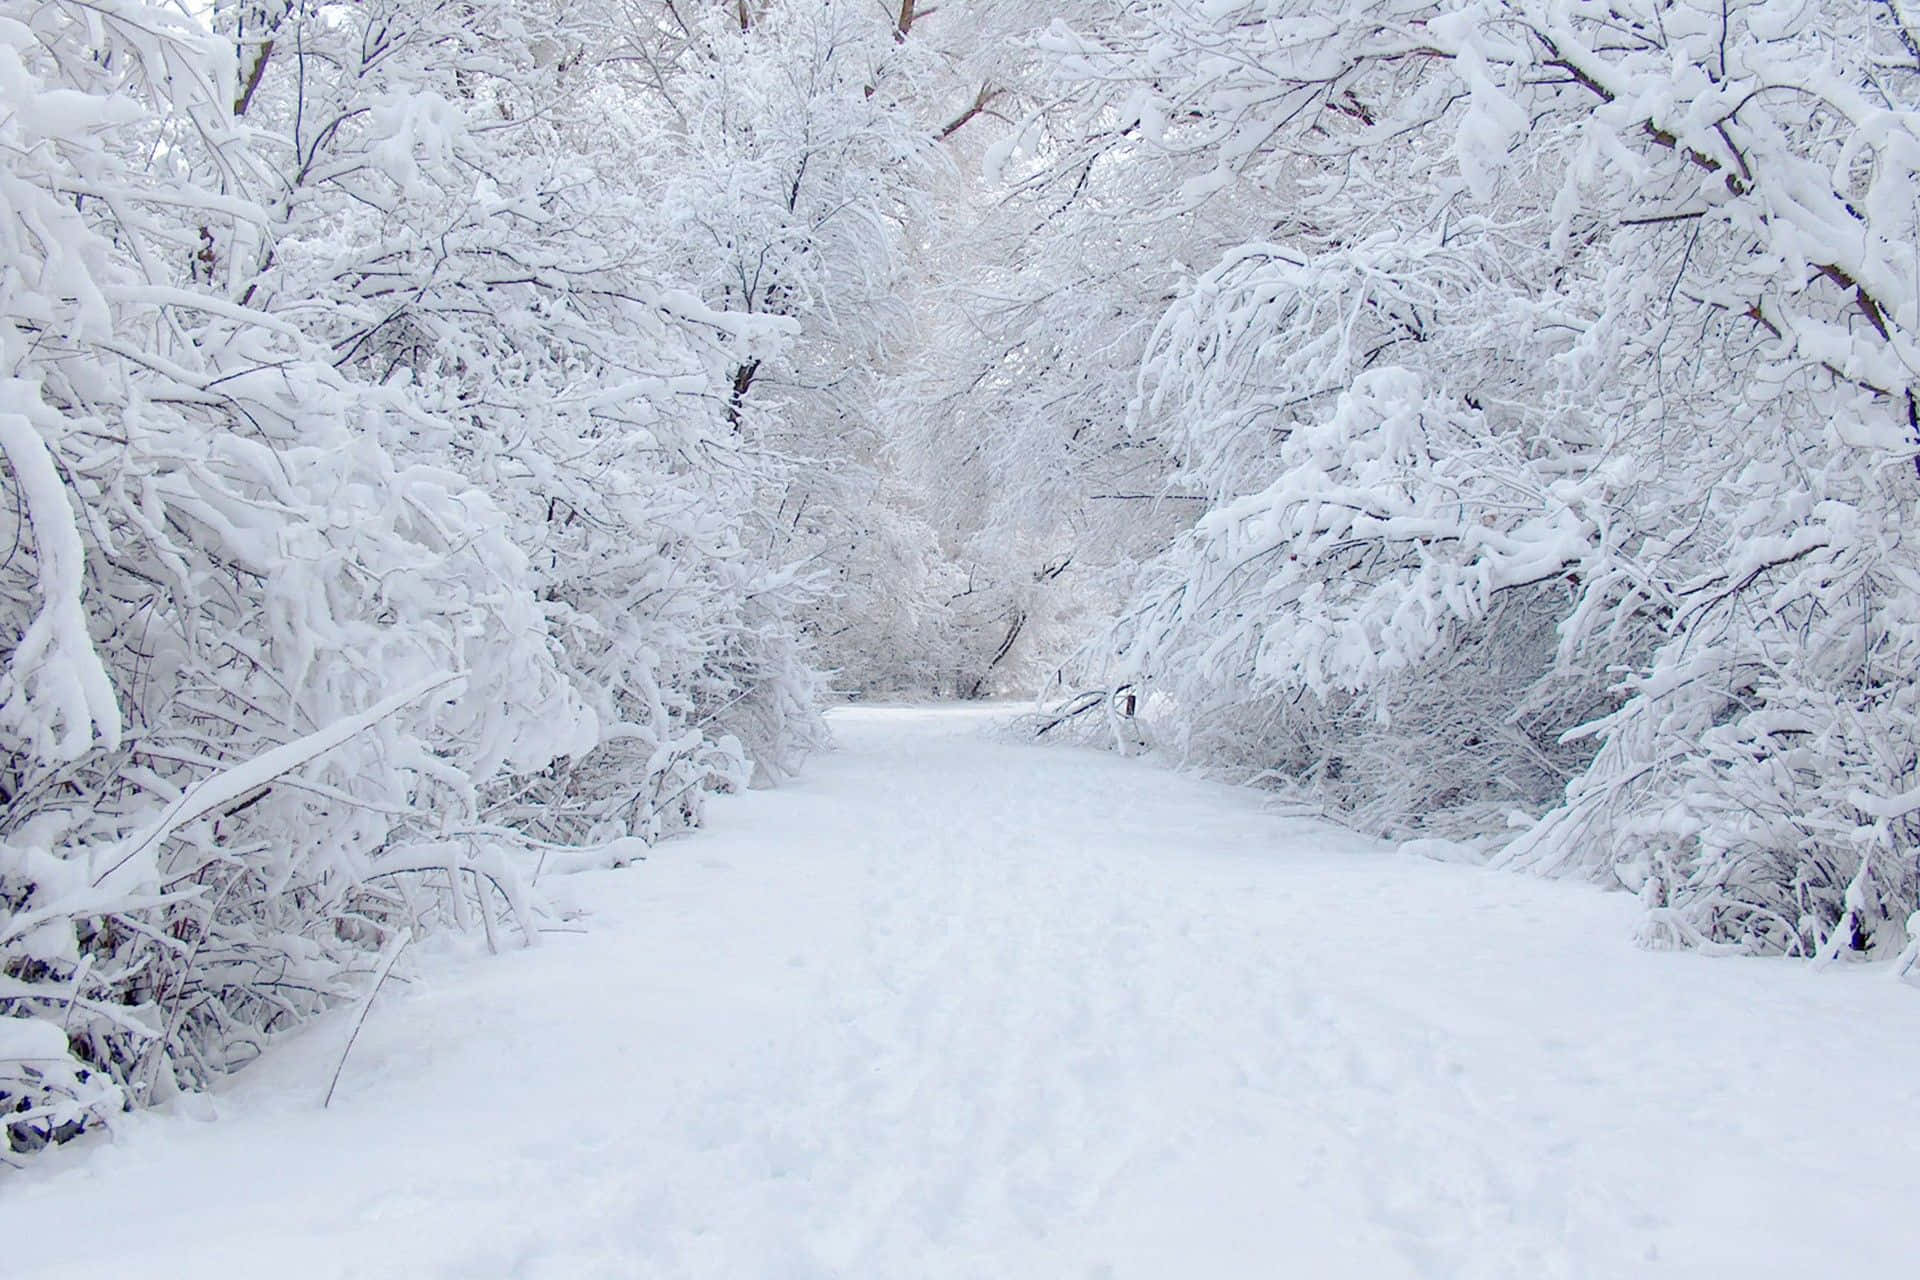 Dreamy Snow-Covered Trees in Winter Wonderland Wallpaper